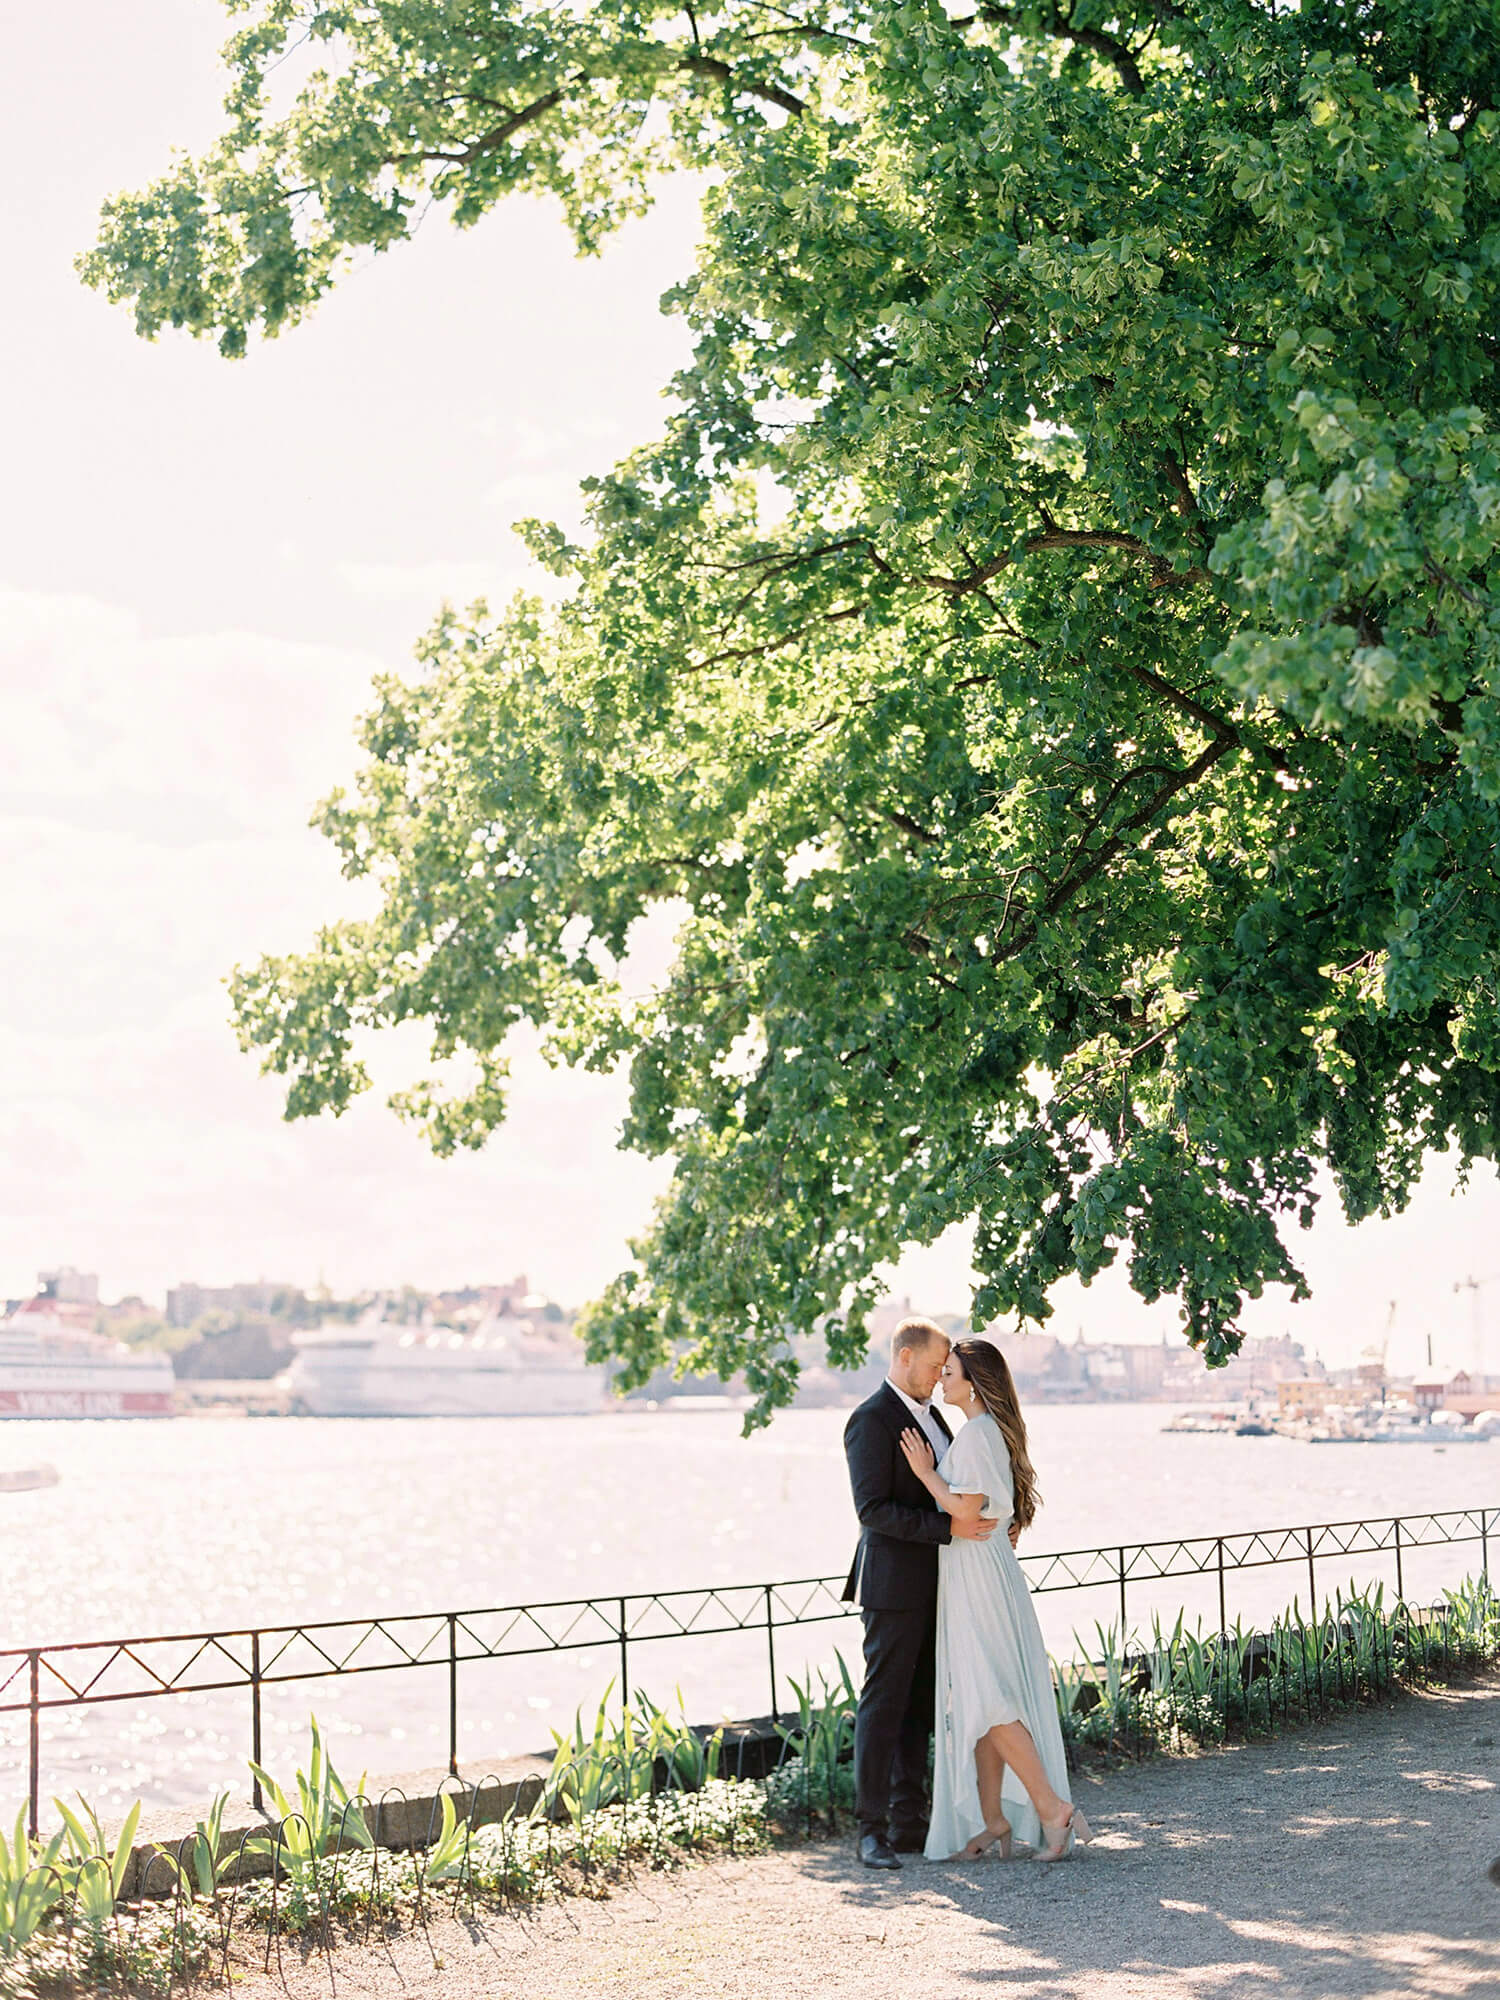 Best places for engagement photos in Stockholm